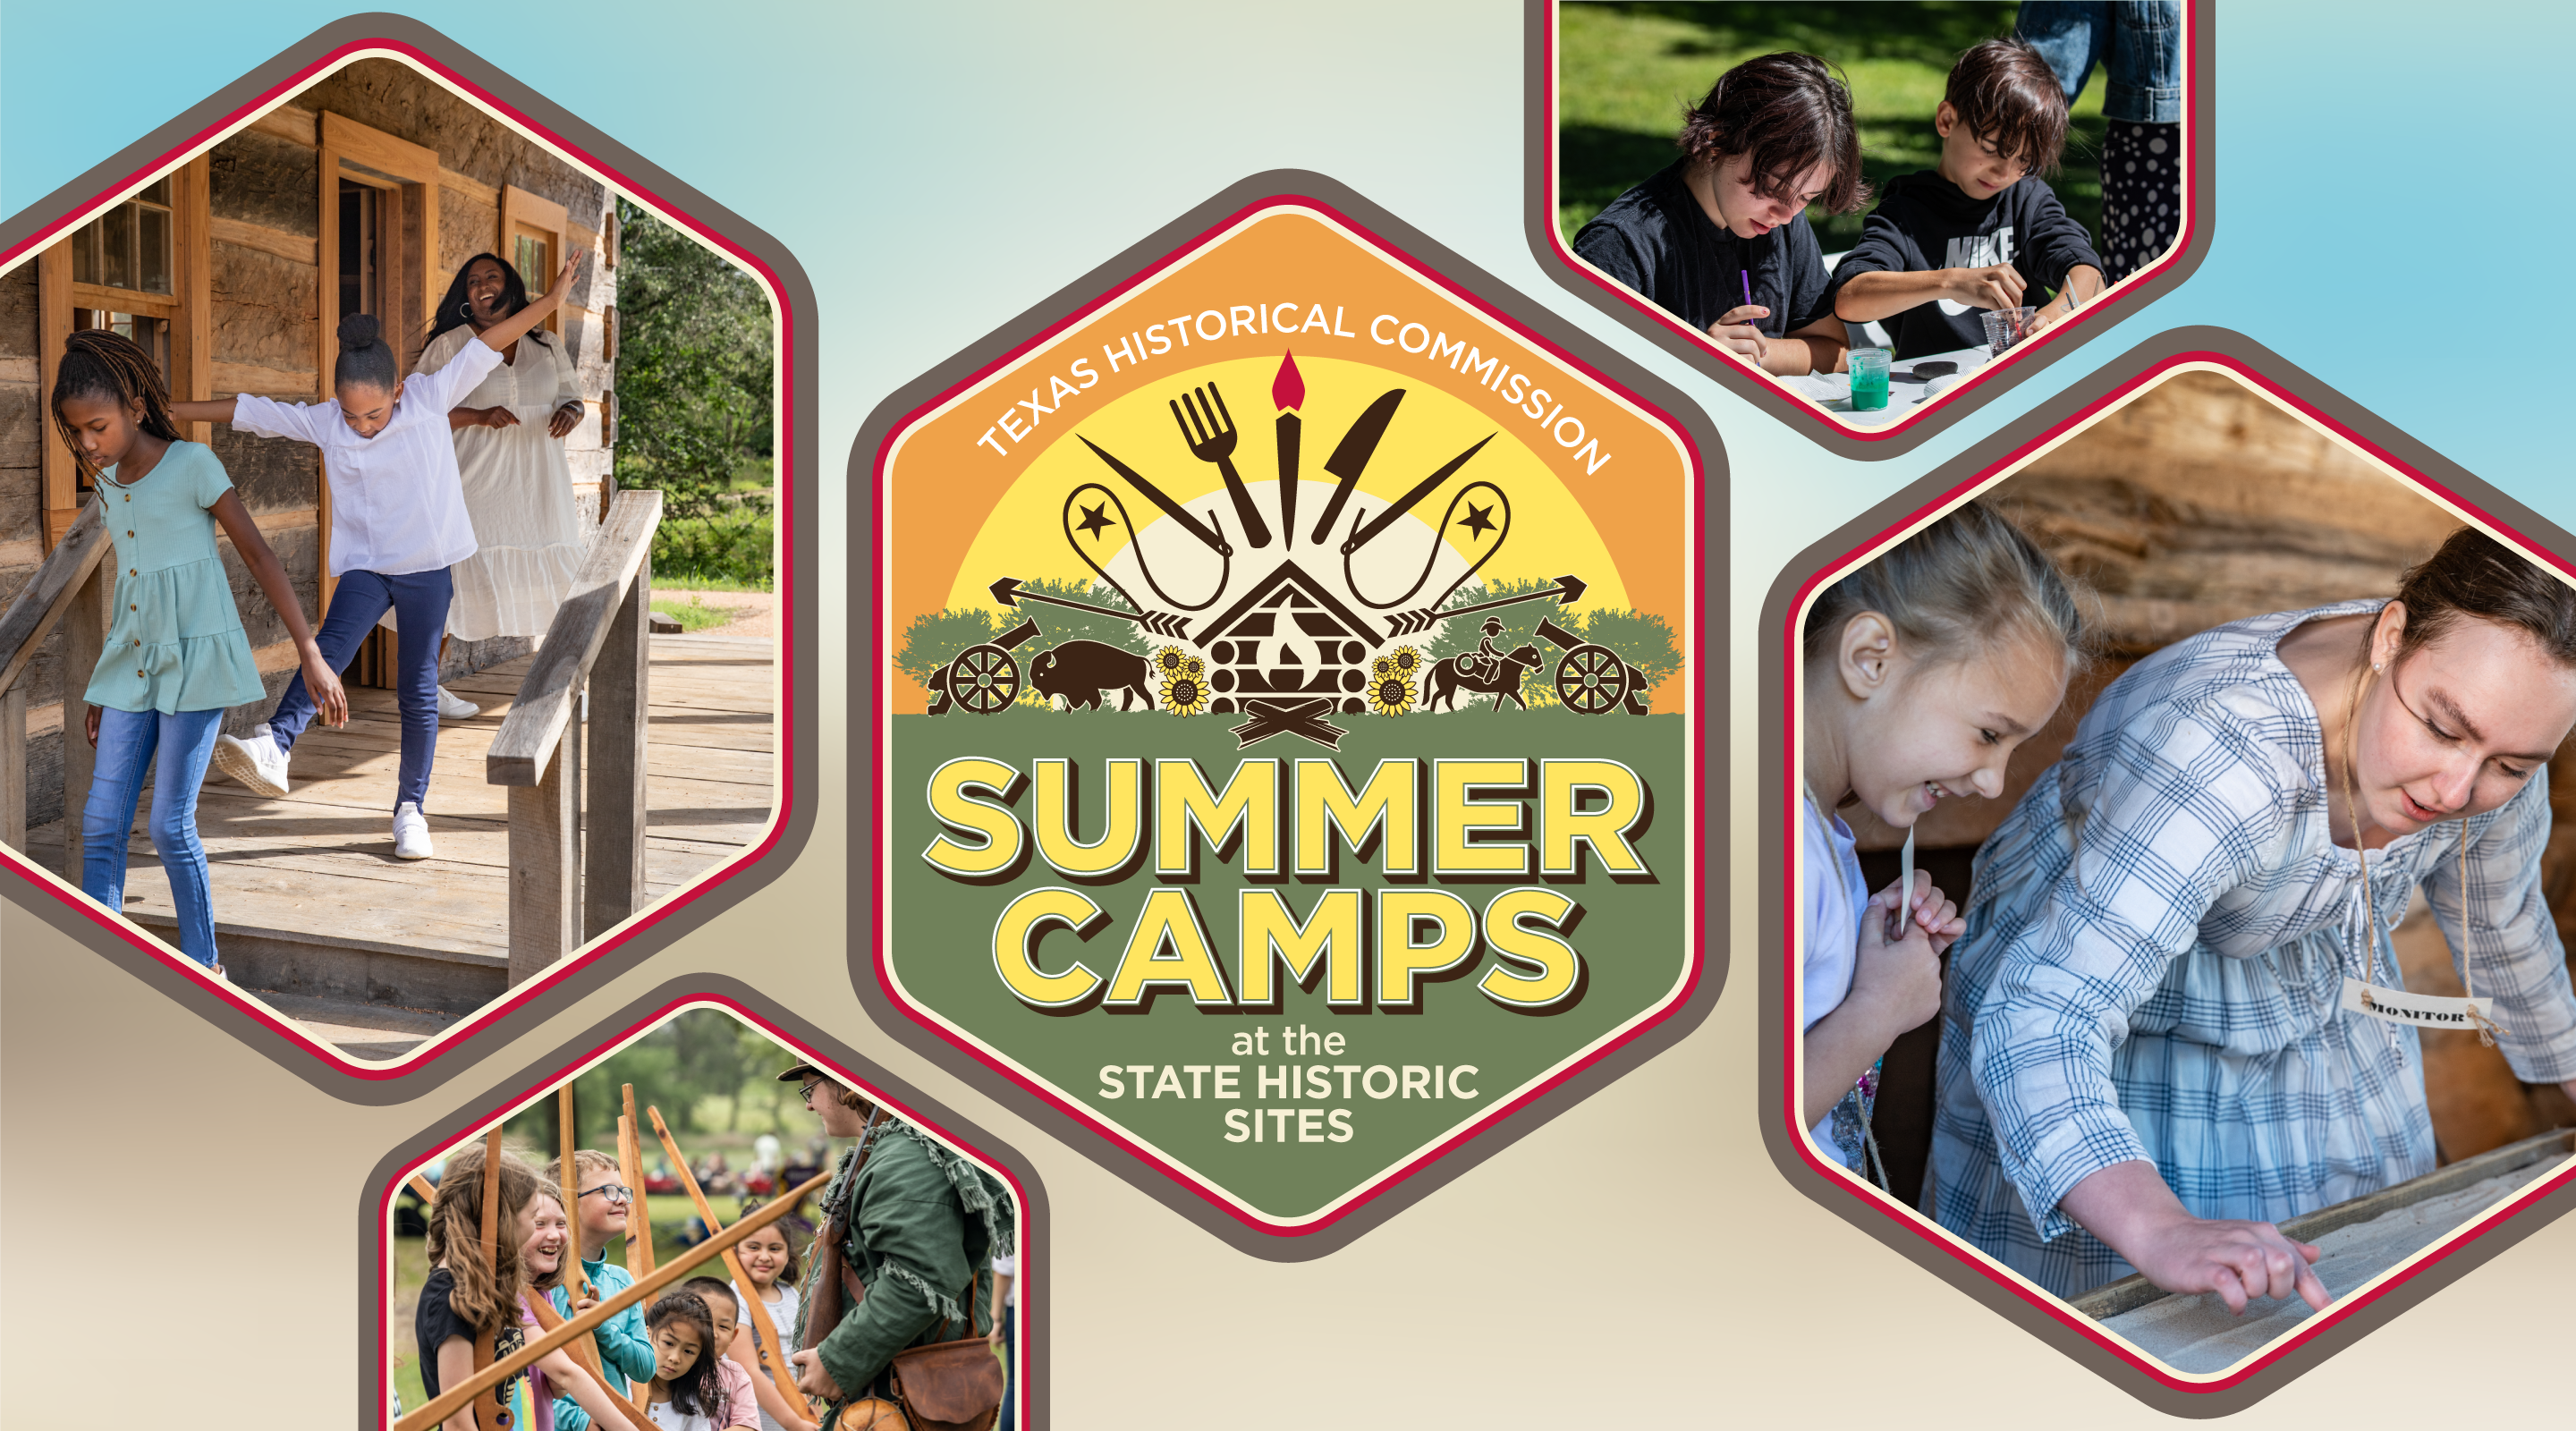 State Historic Sites Summer Camps collage and logo